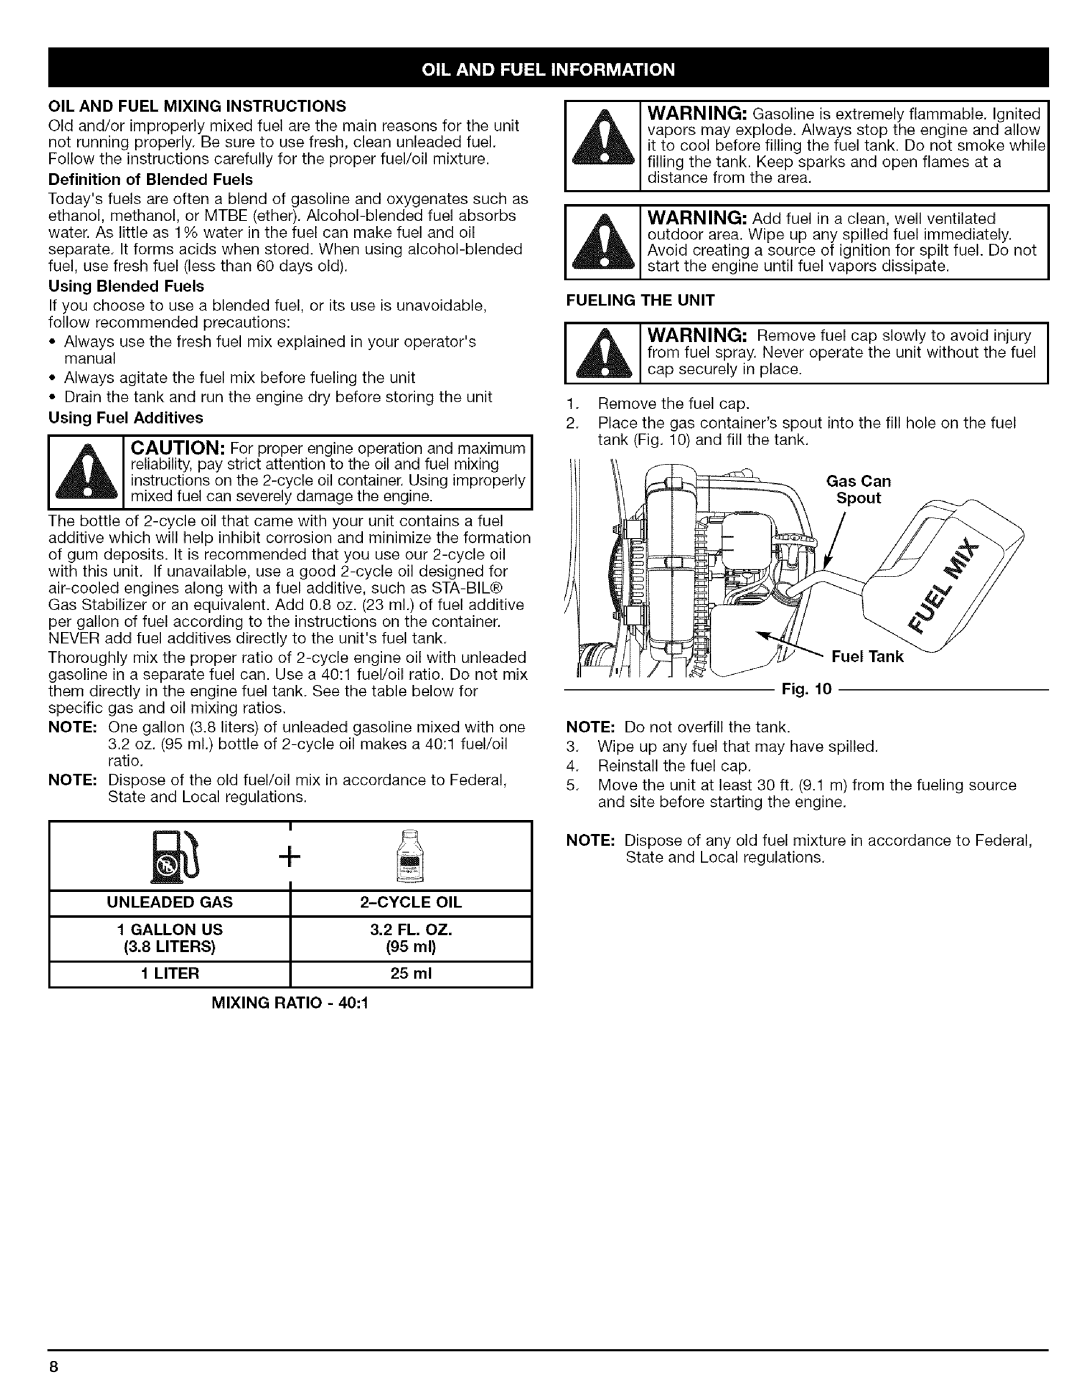 Craftsman 316.79479 manual Oil And Fuel Mixing Instructions, Gallon Us, 3.2 FL, Liter, 25 ml 